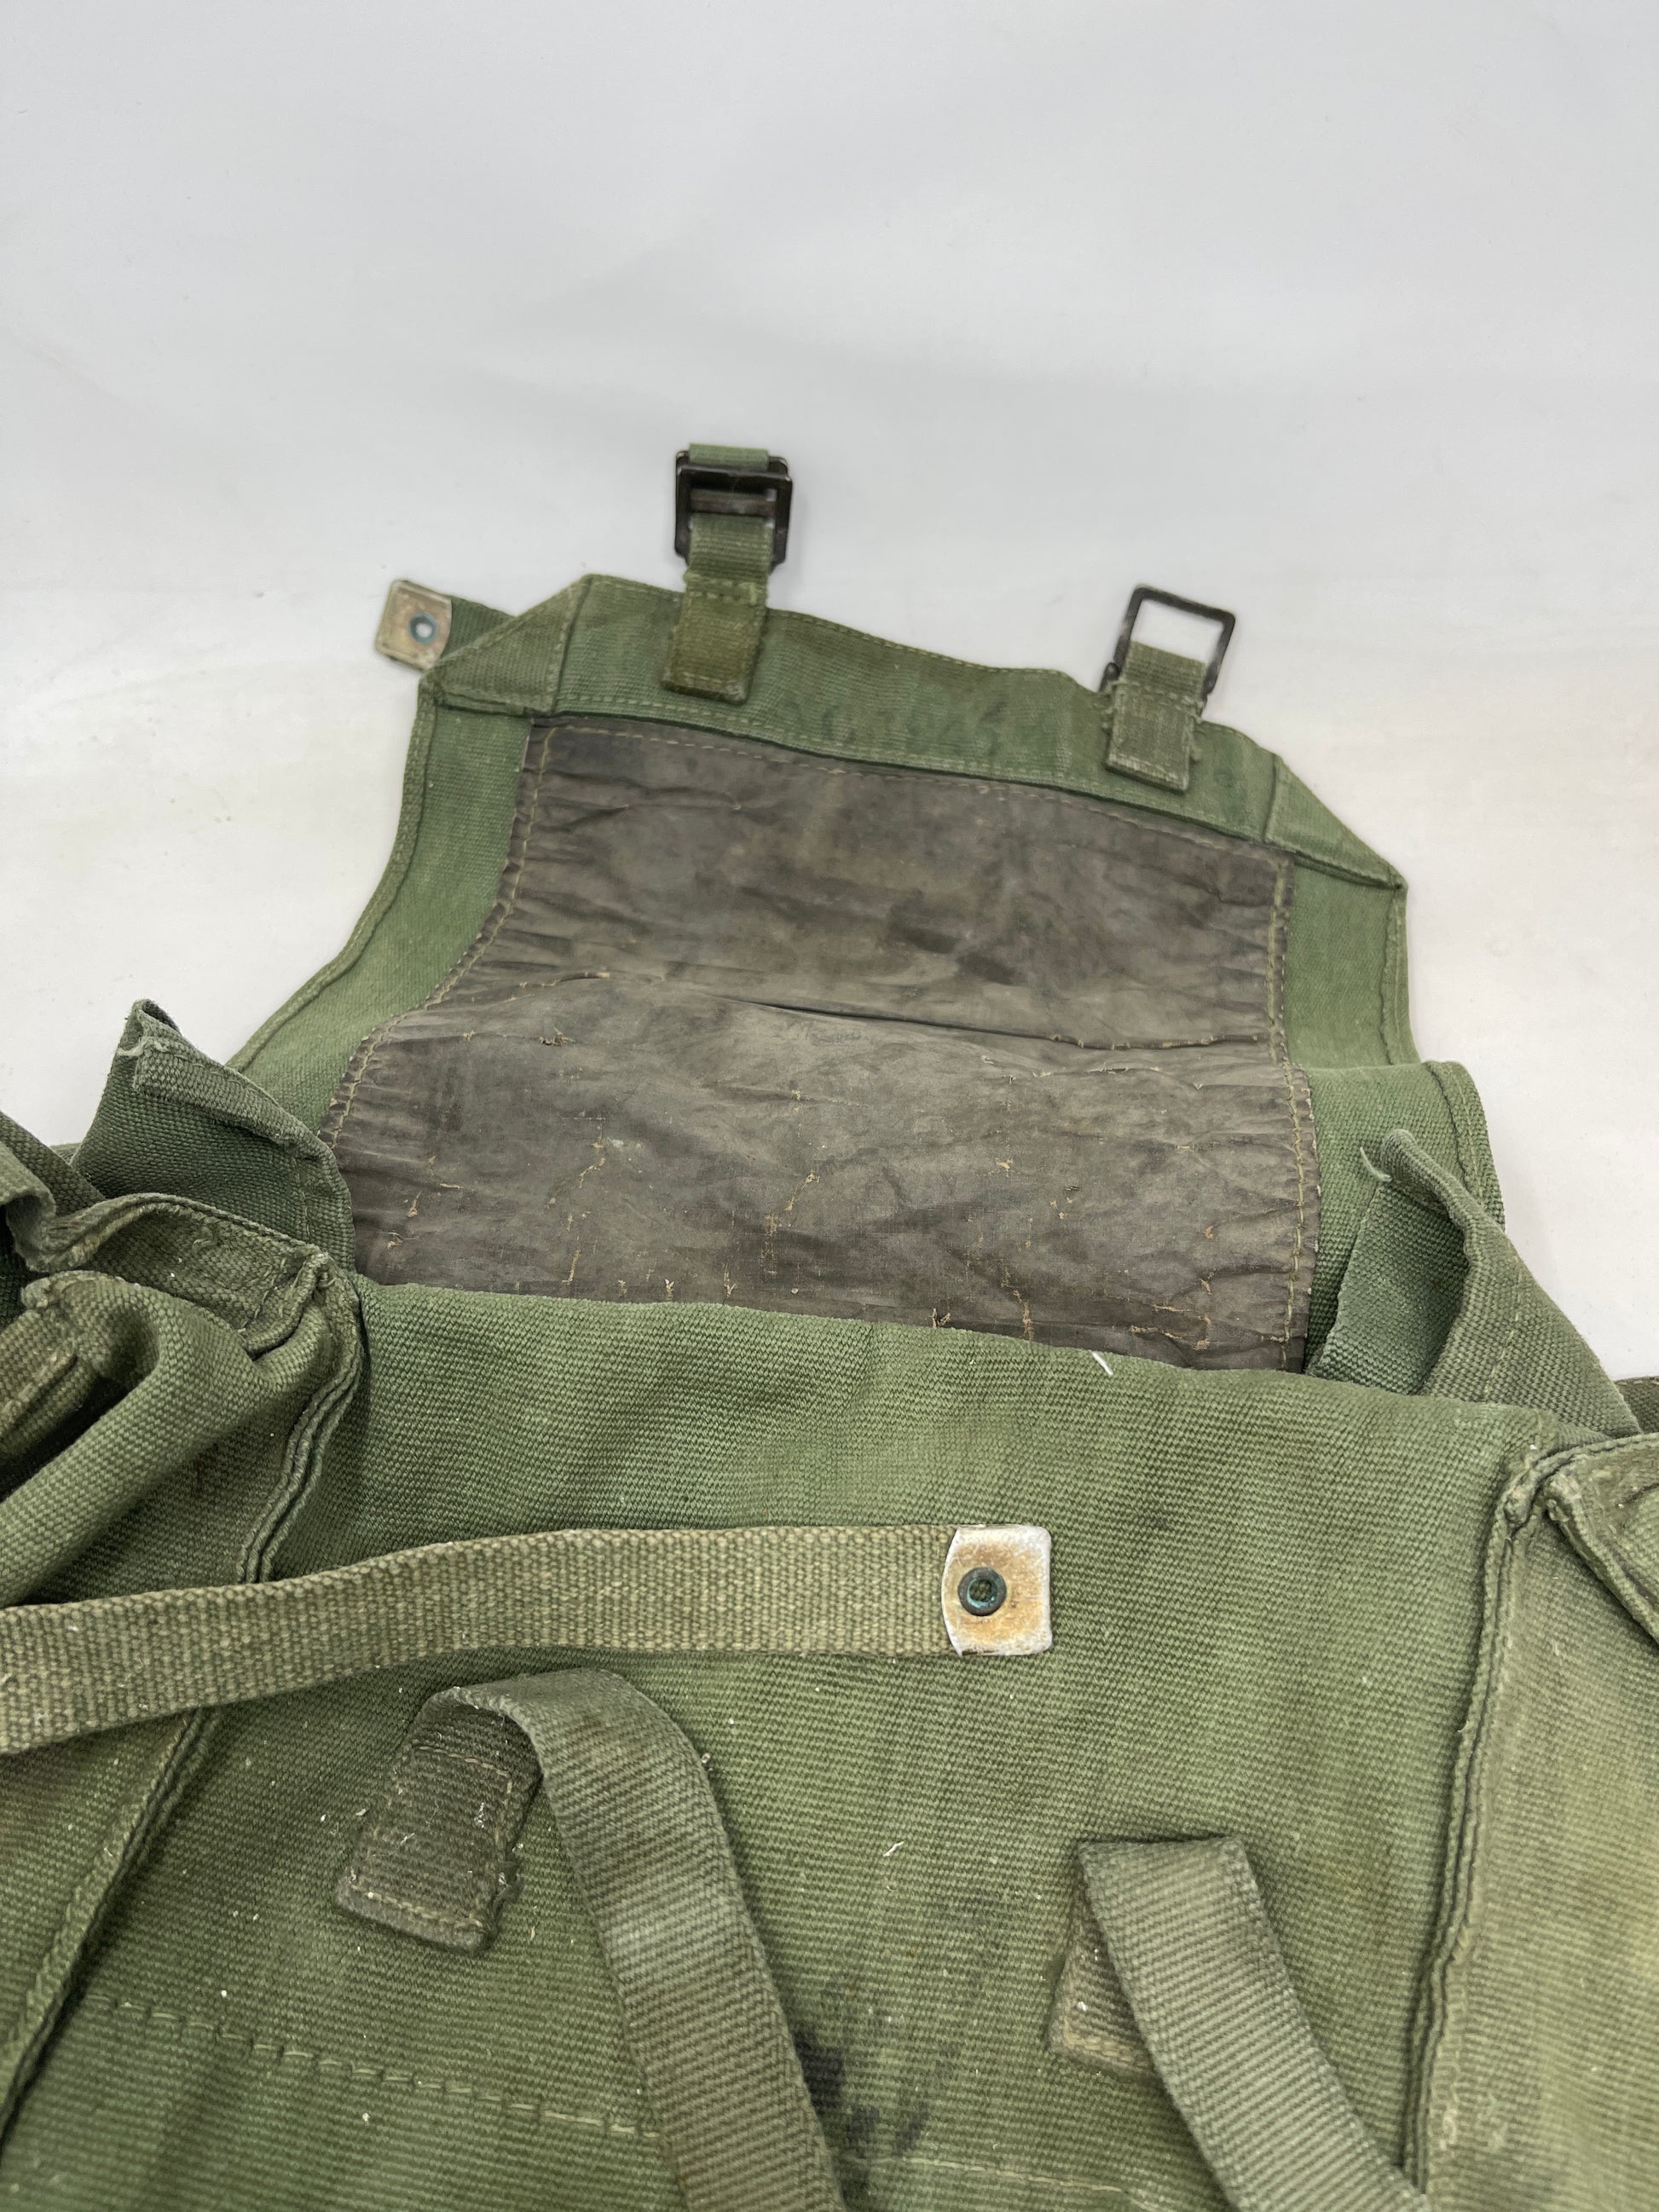 inside image of 1944 Pattern Webbing Small Pack, Jungle showing waterproof cover